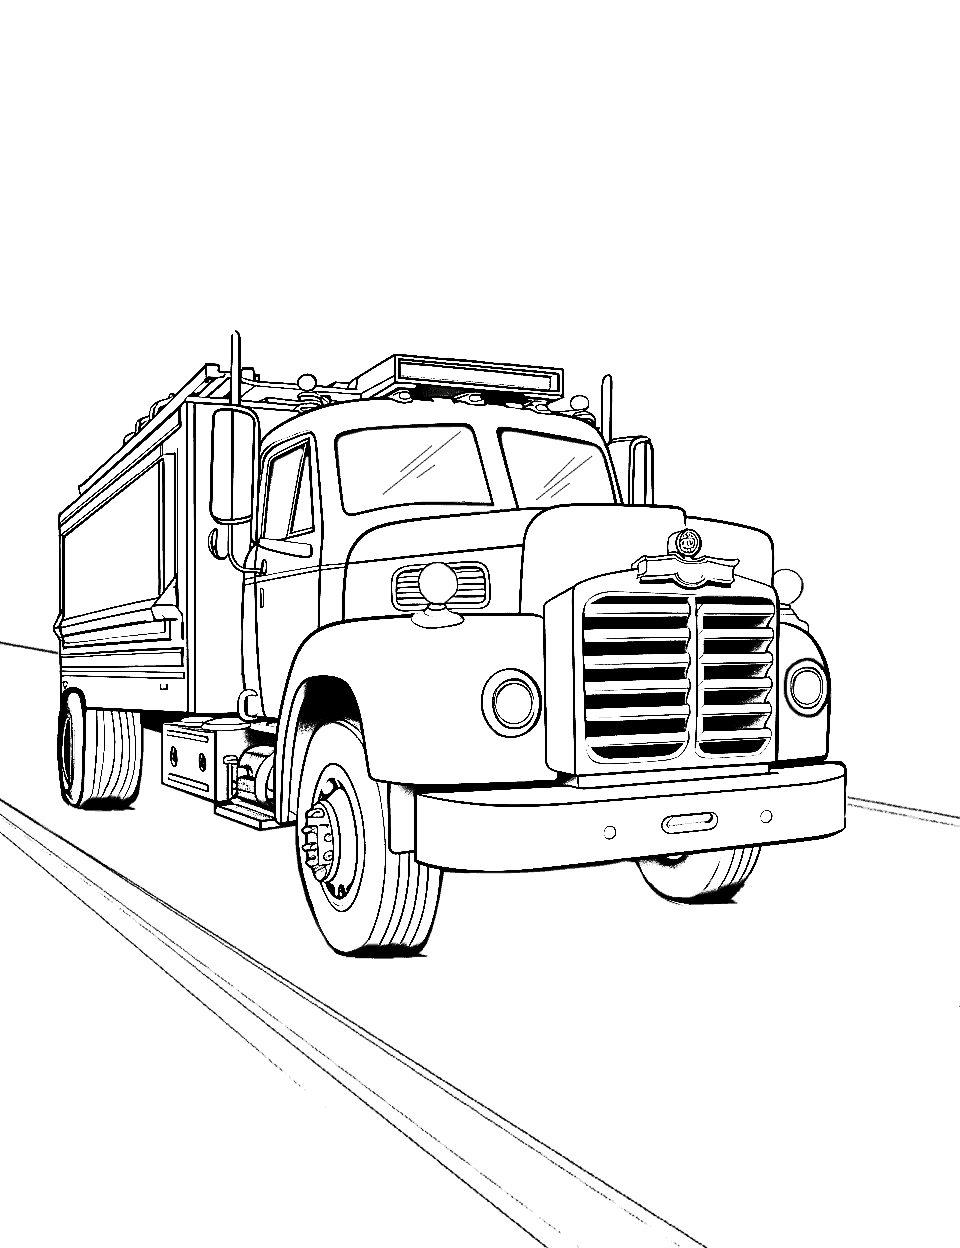 Fire Truck to the Rescue Coloring Page - A fire truck with lights and sirens on, racing to extinguish a fire.